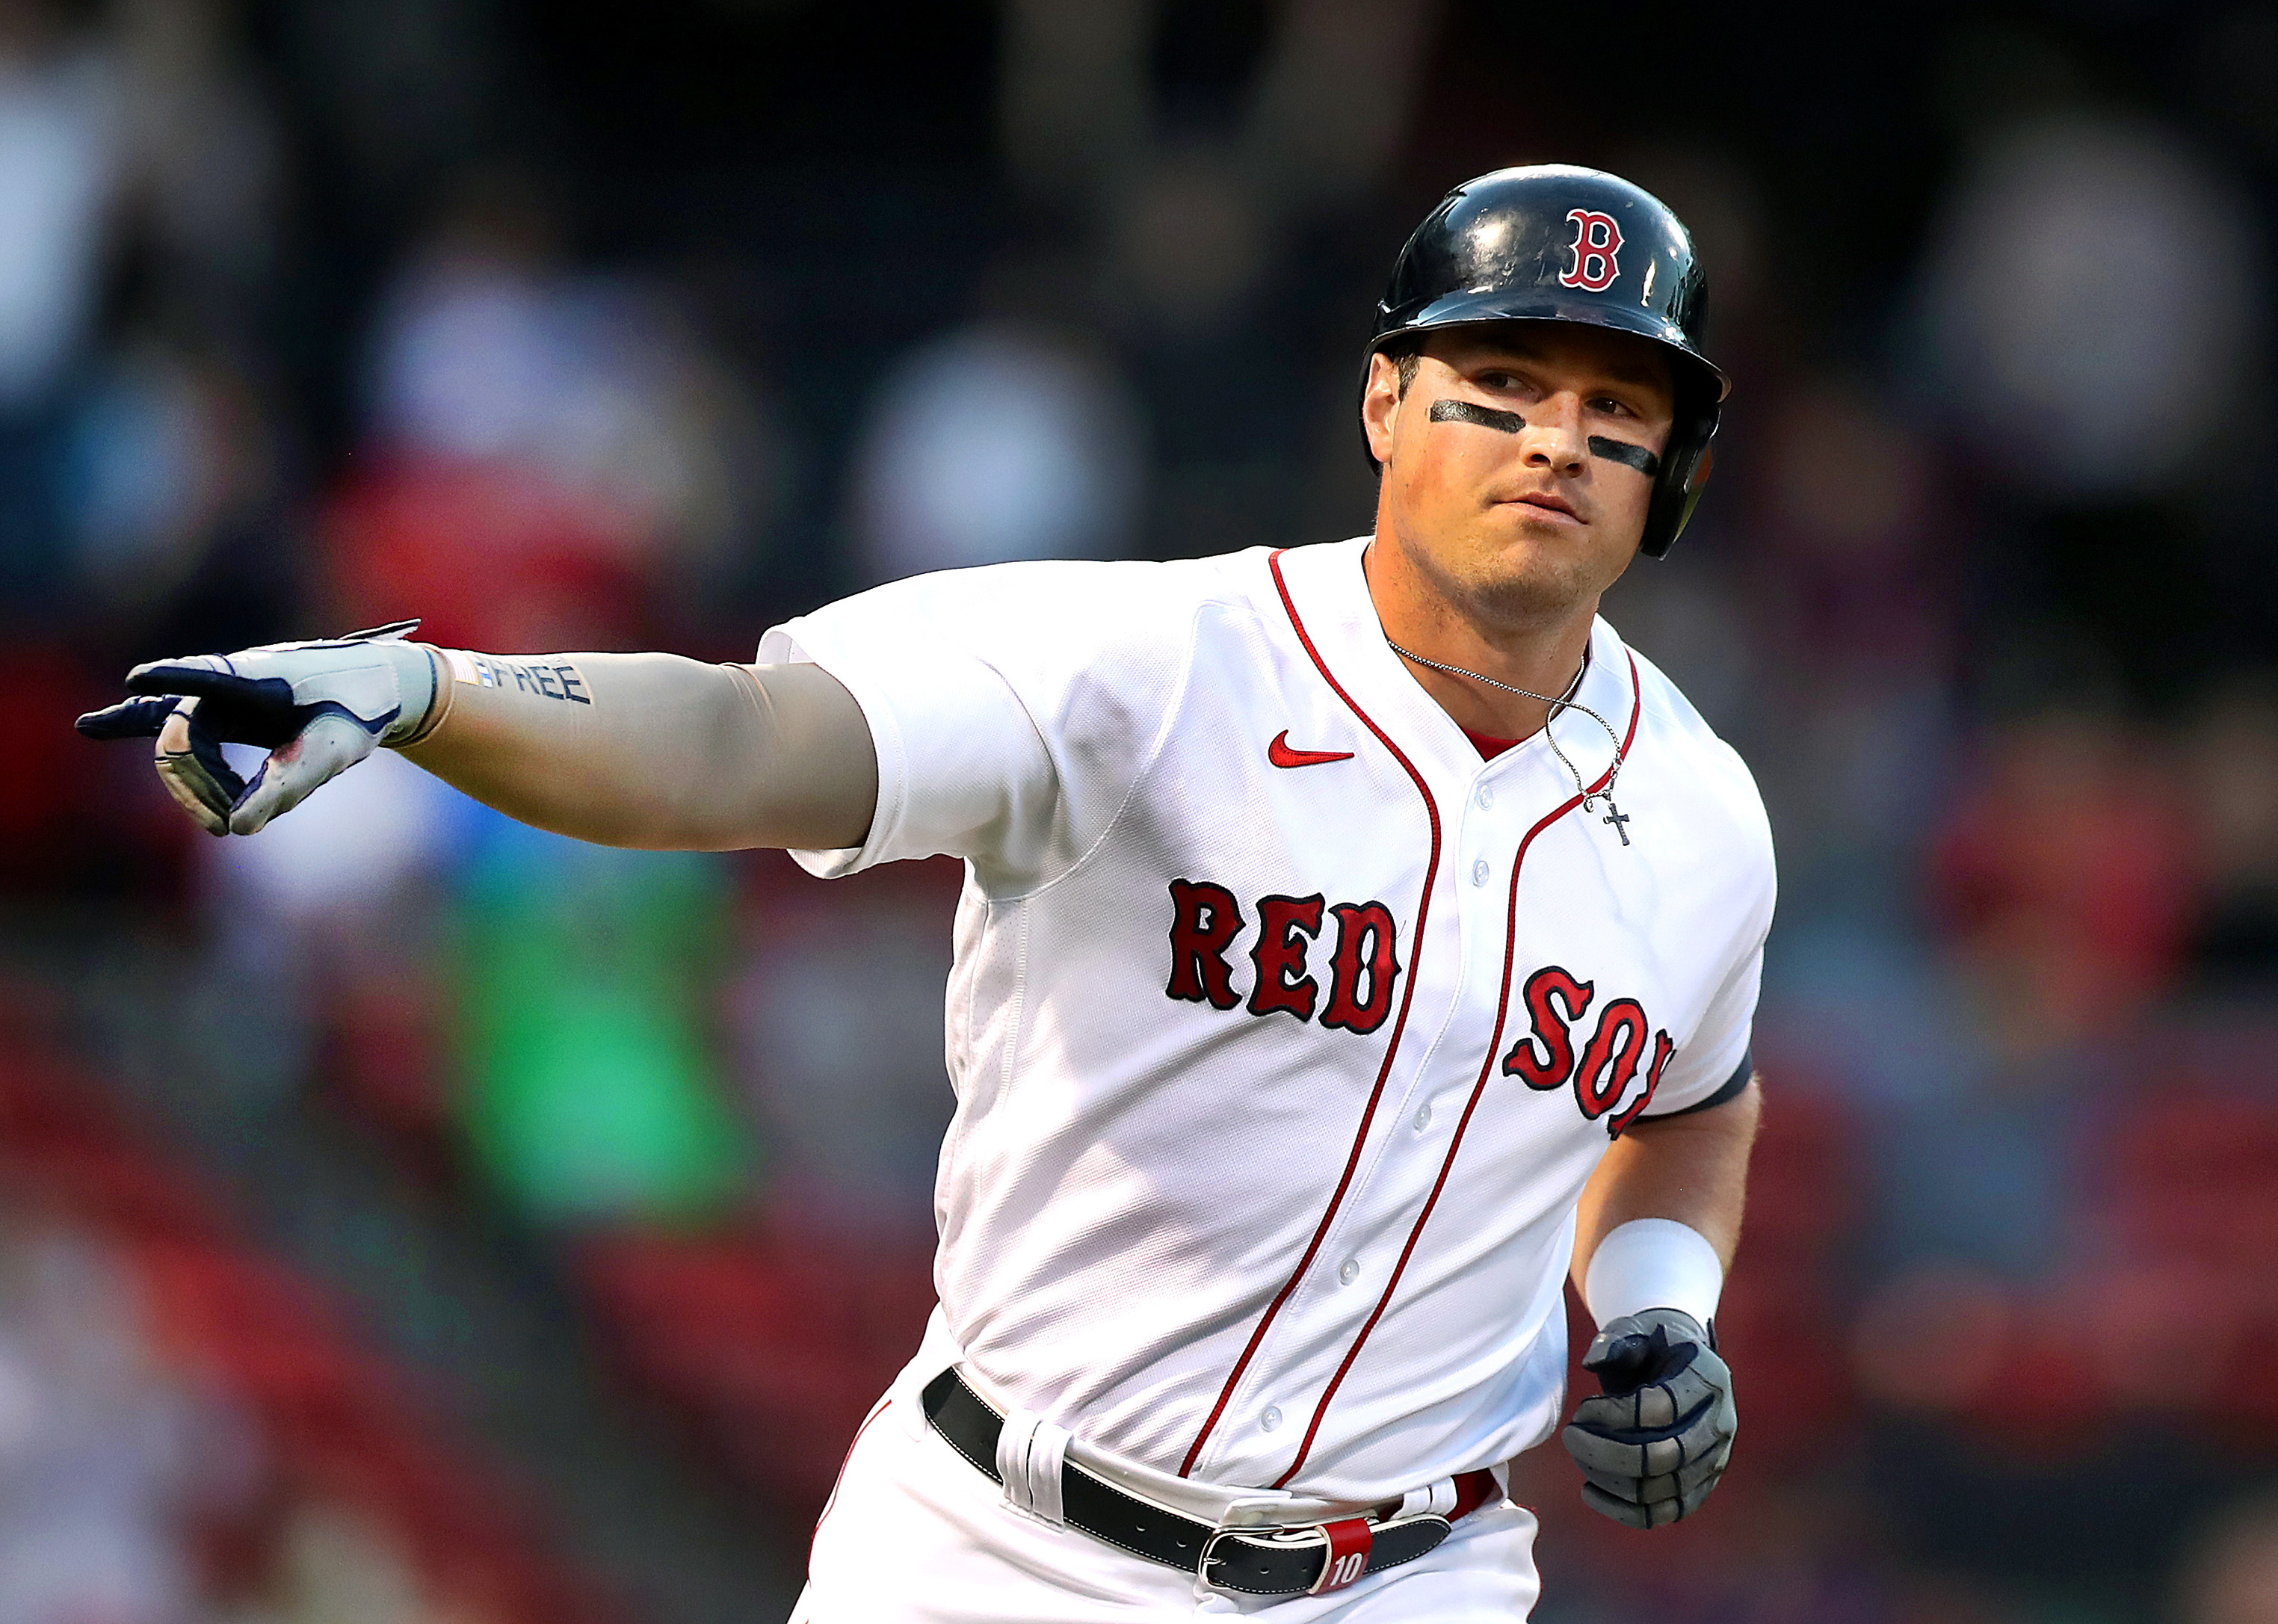 An old Red Sox enemy, Ron Darling, can relate to them this year